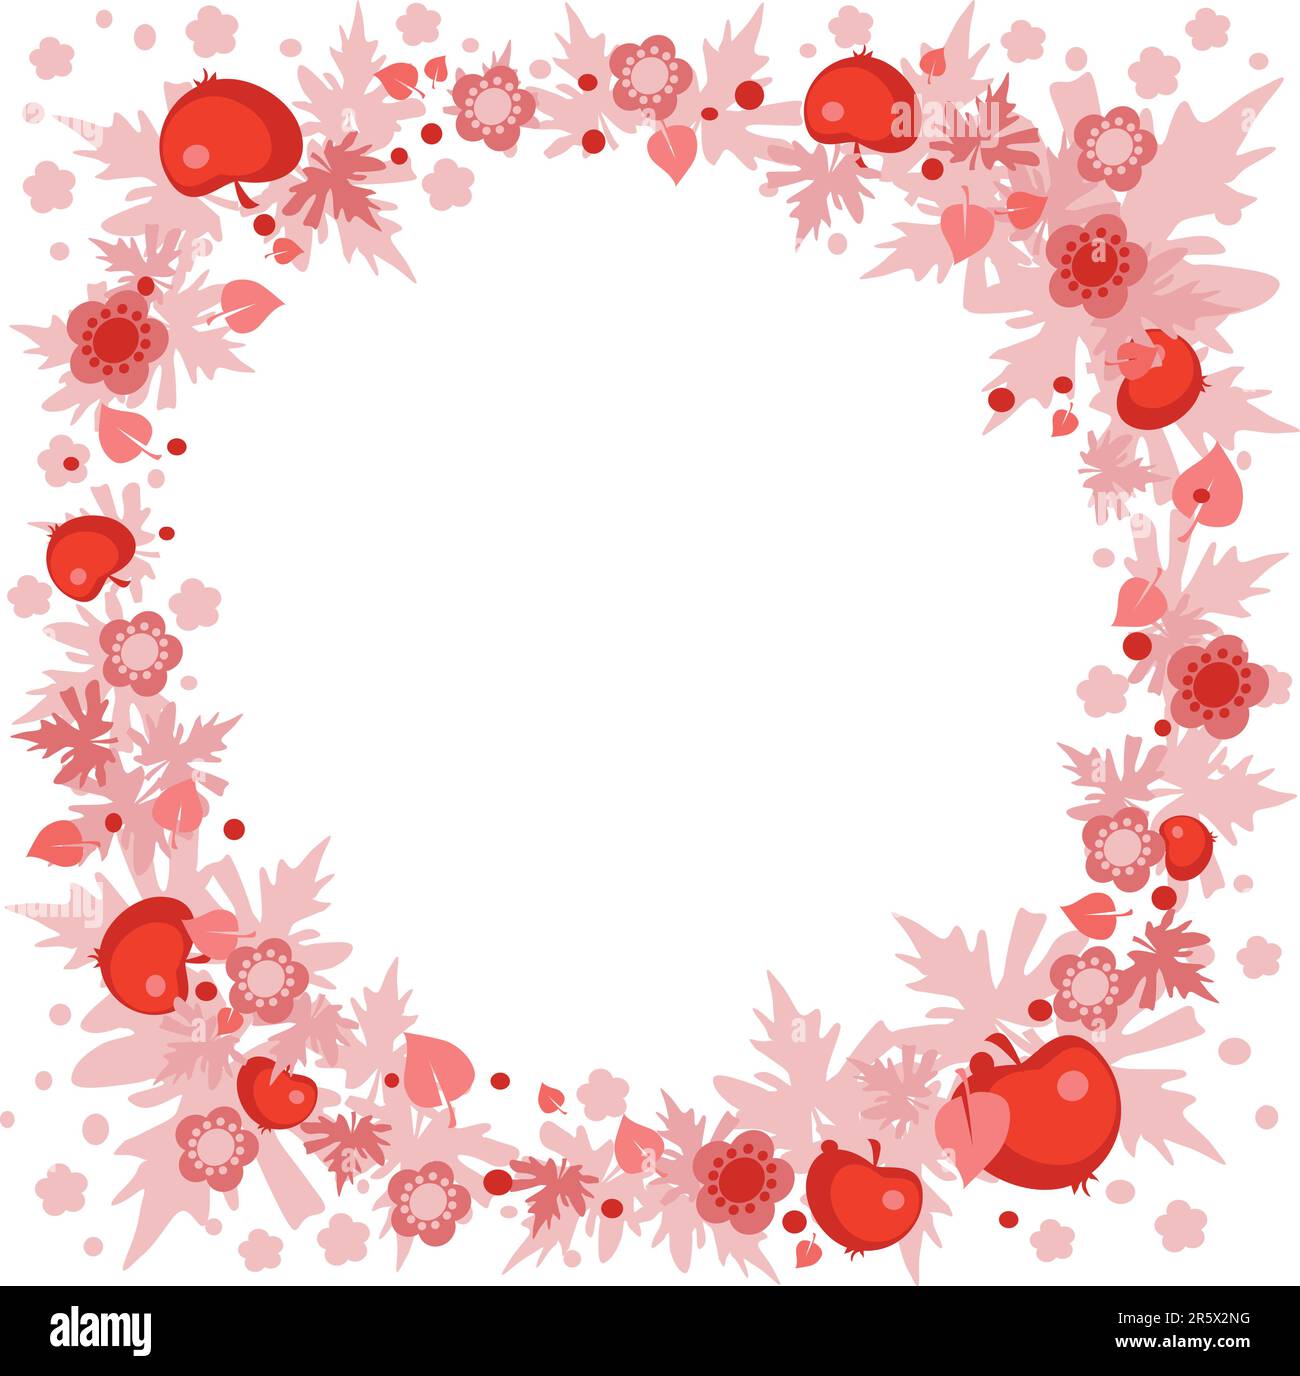 vignette with red apples and butterfly Stock Vector